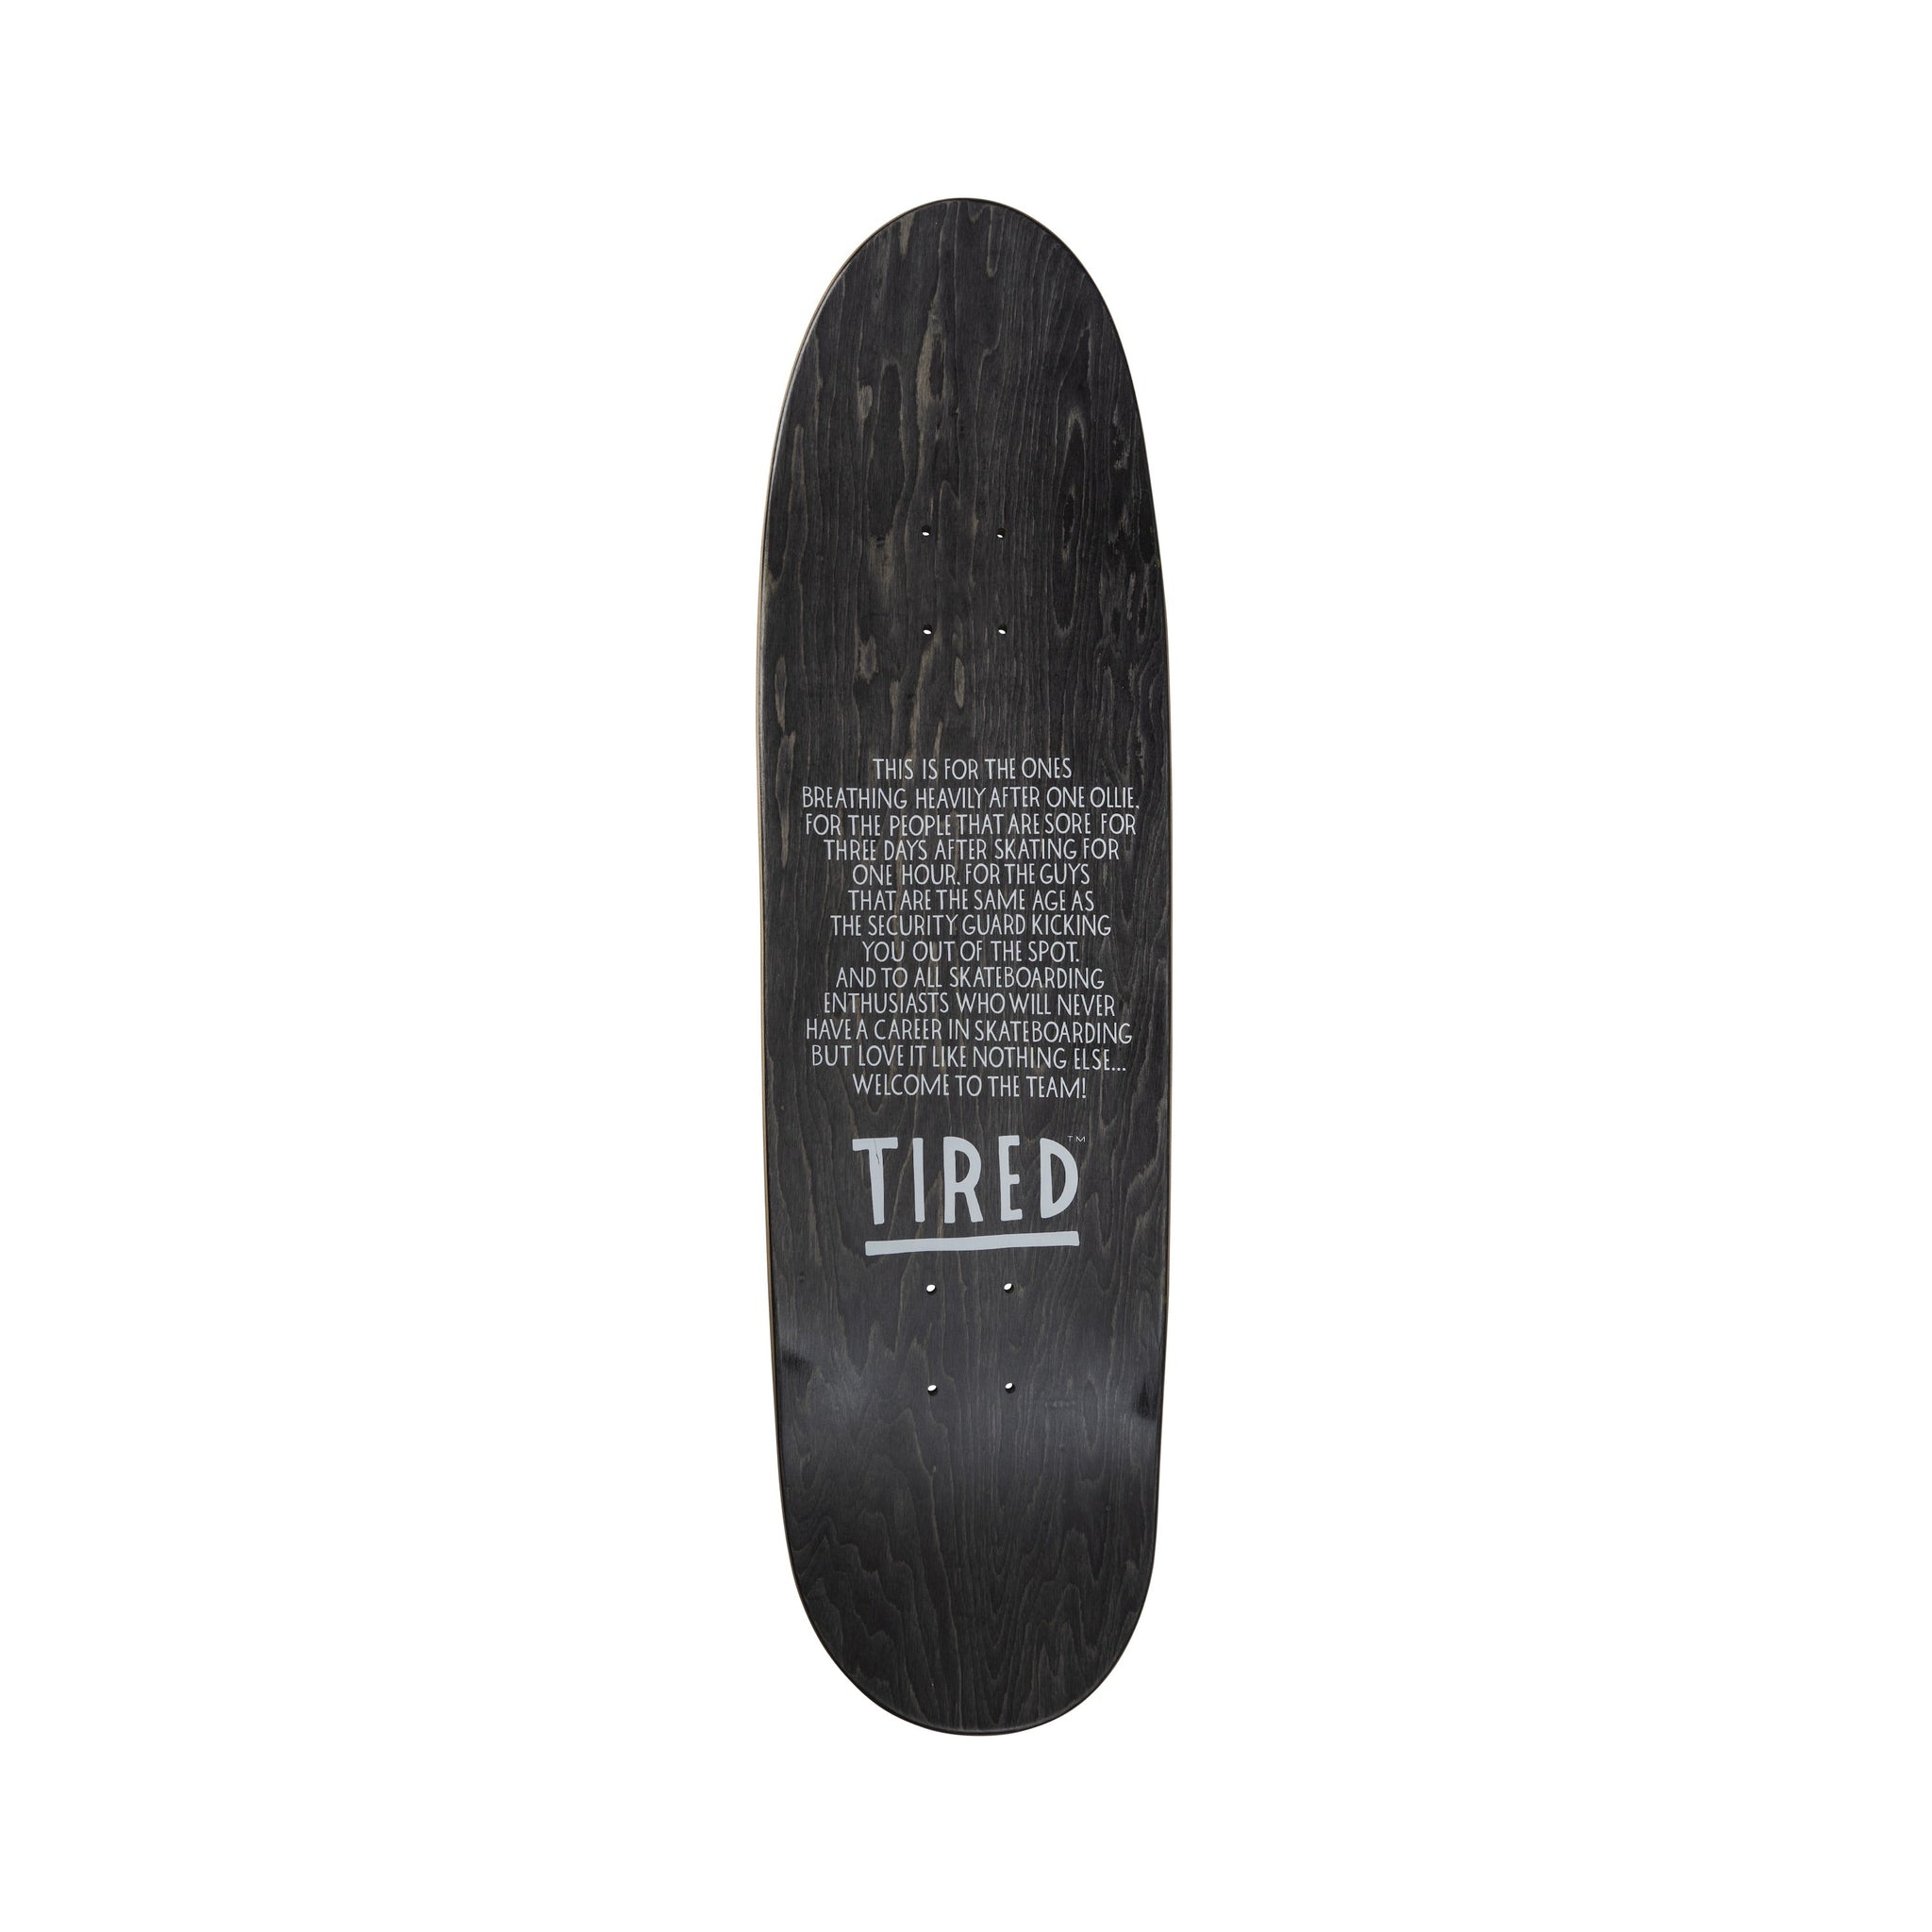 Tipsy Mouse Board Deal 8.75"